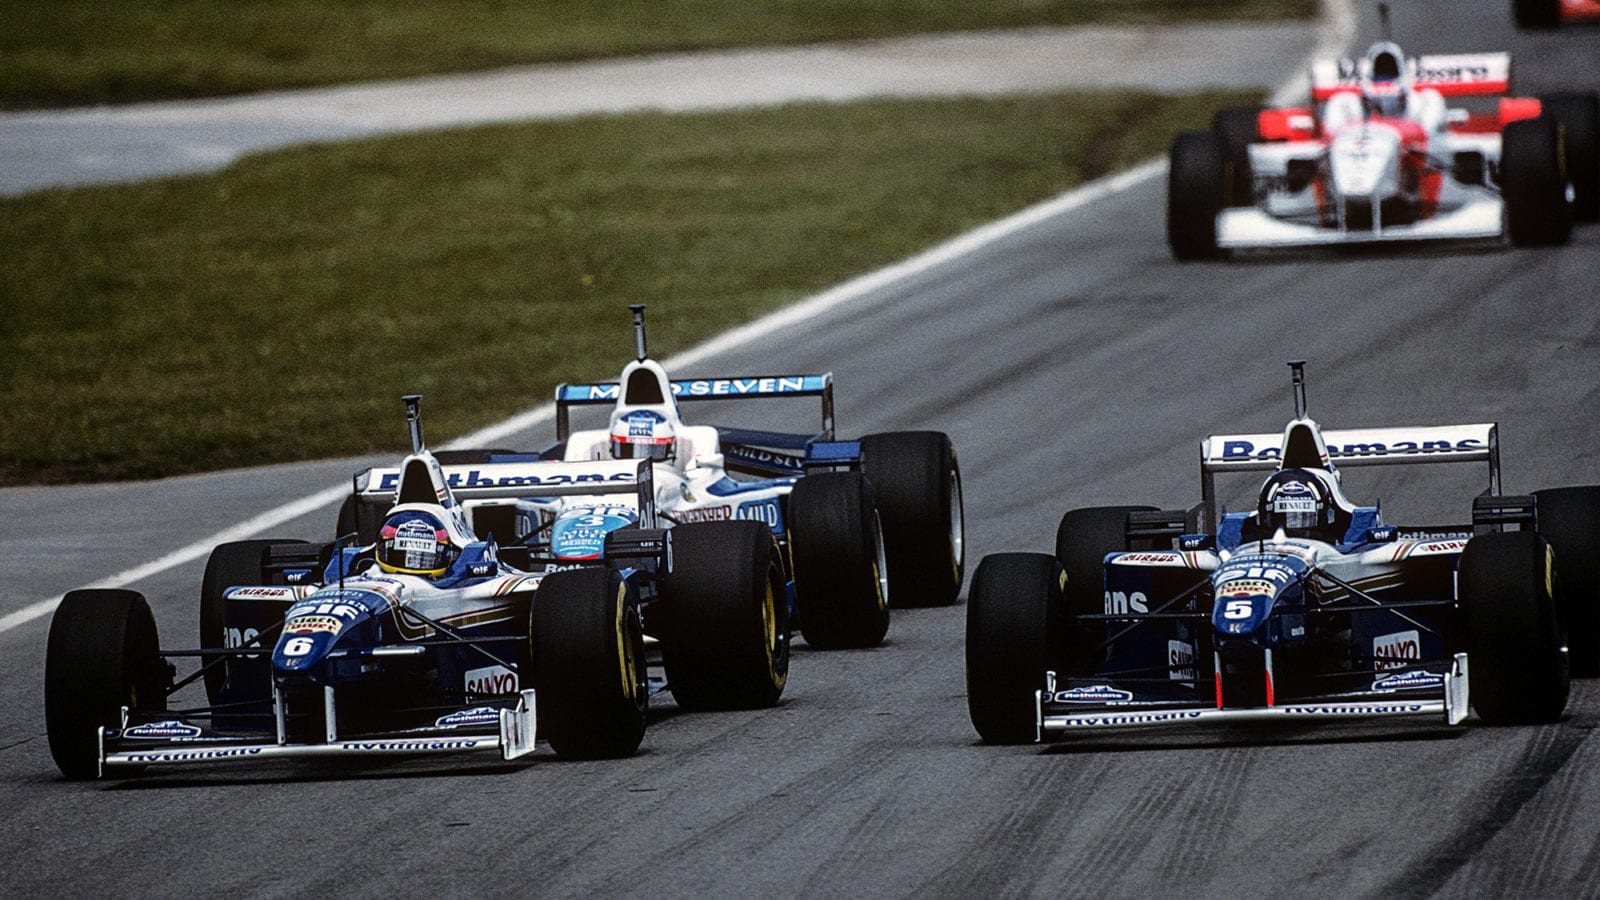 Damon Hill and Jacques Villeneuve side by side at the start of the 1996 Canadian Grand Prix